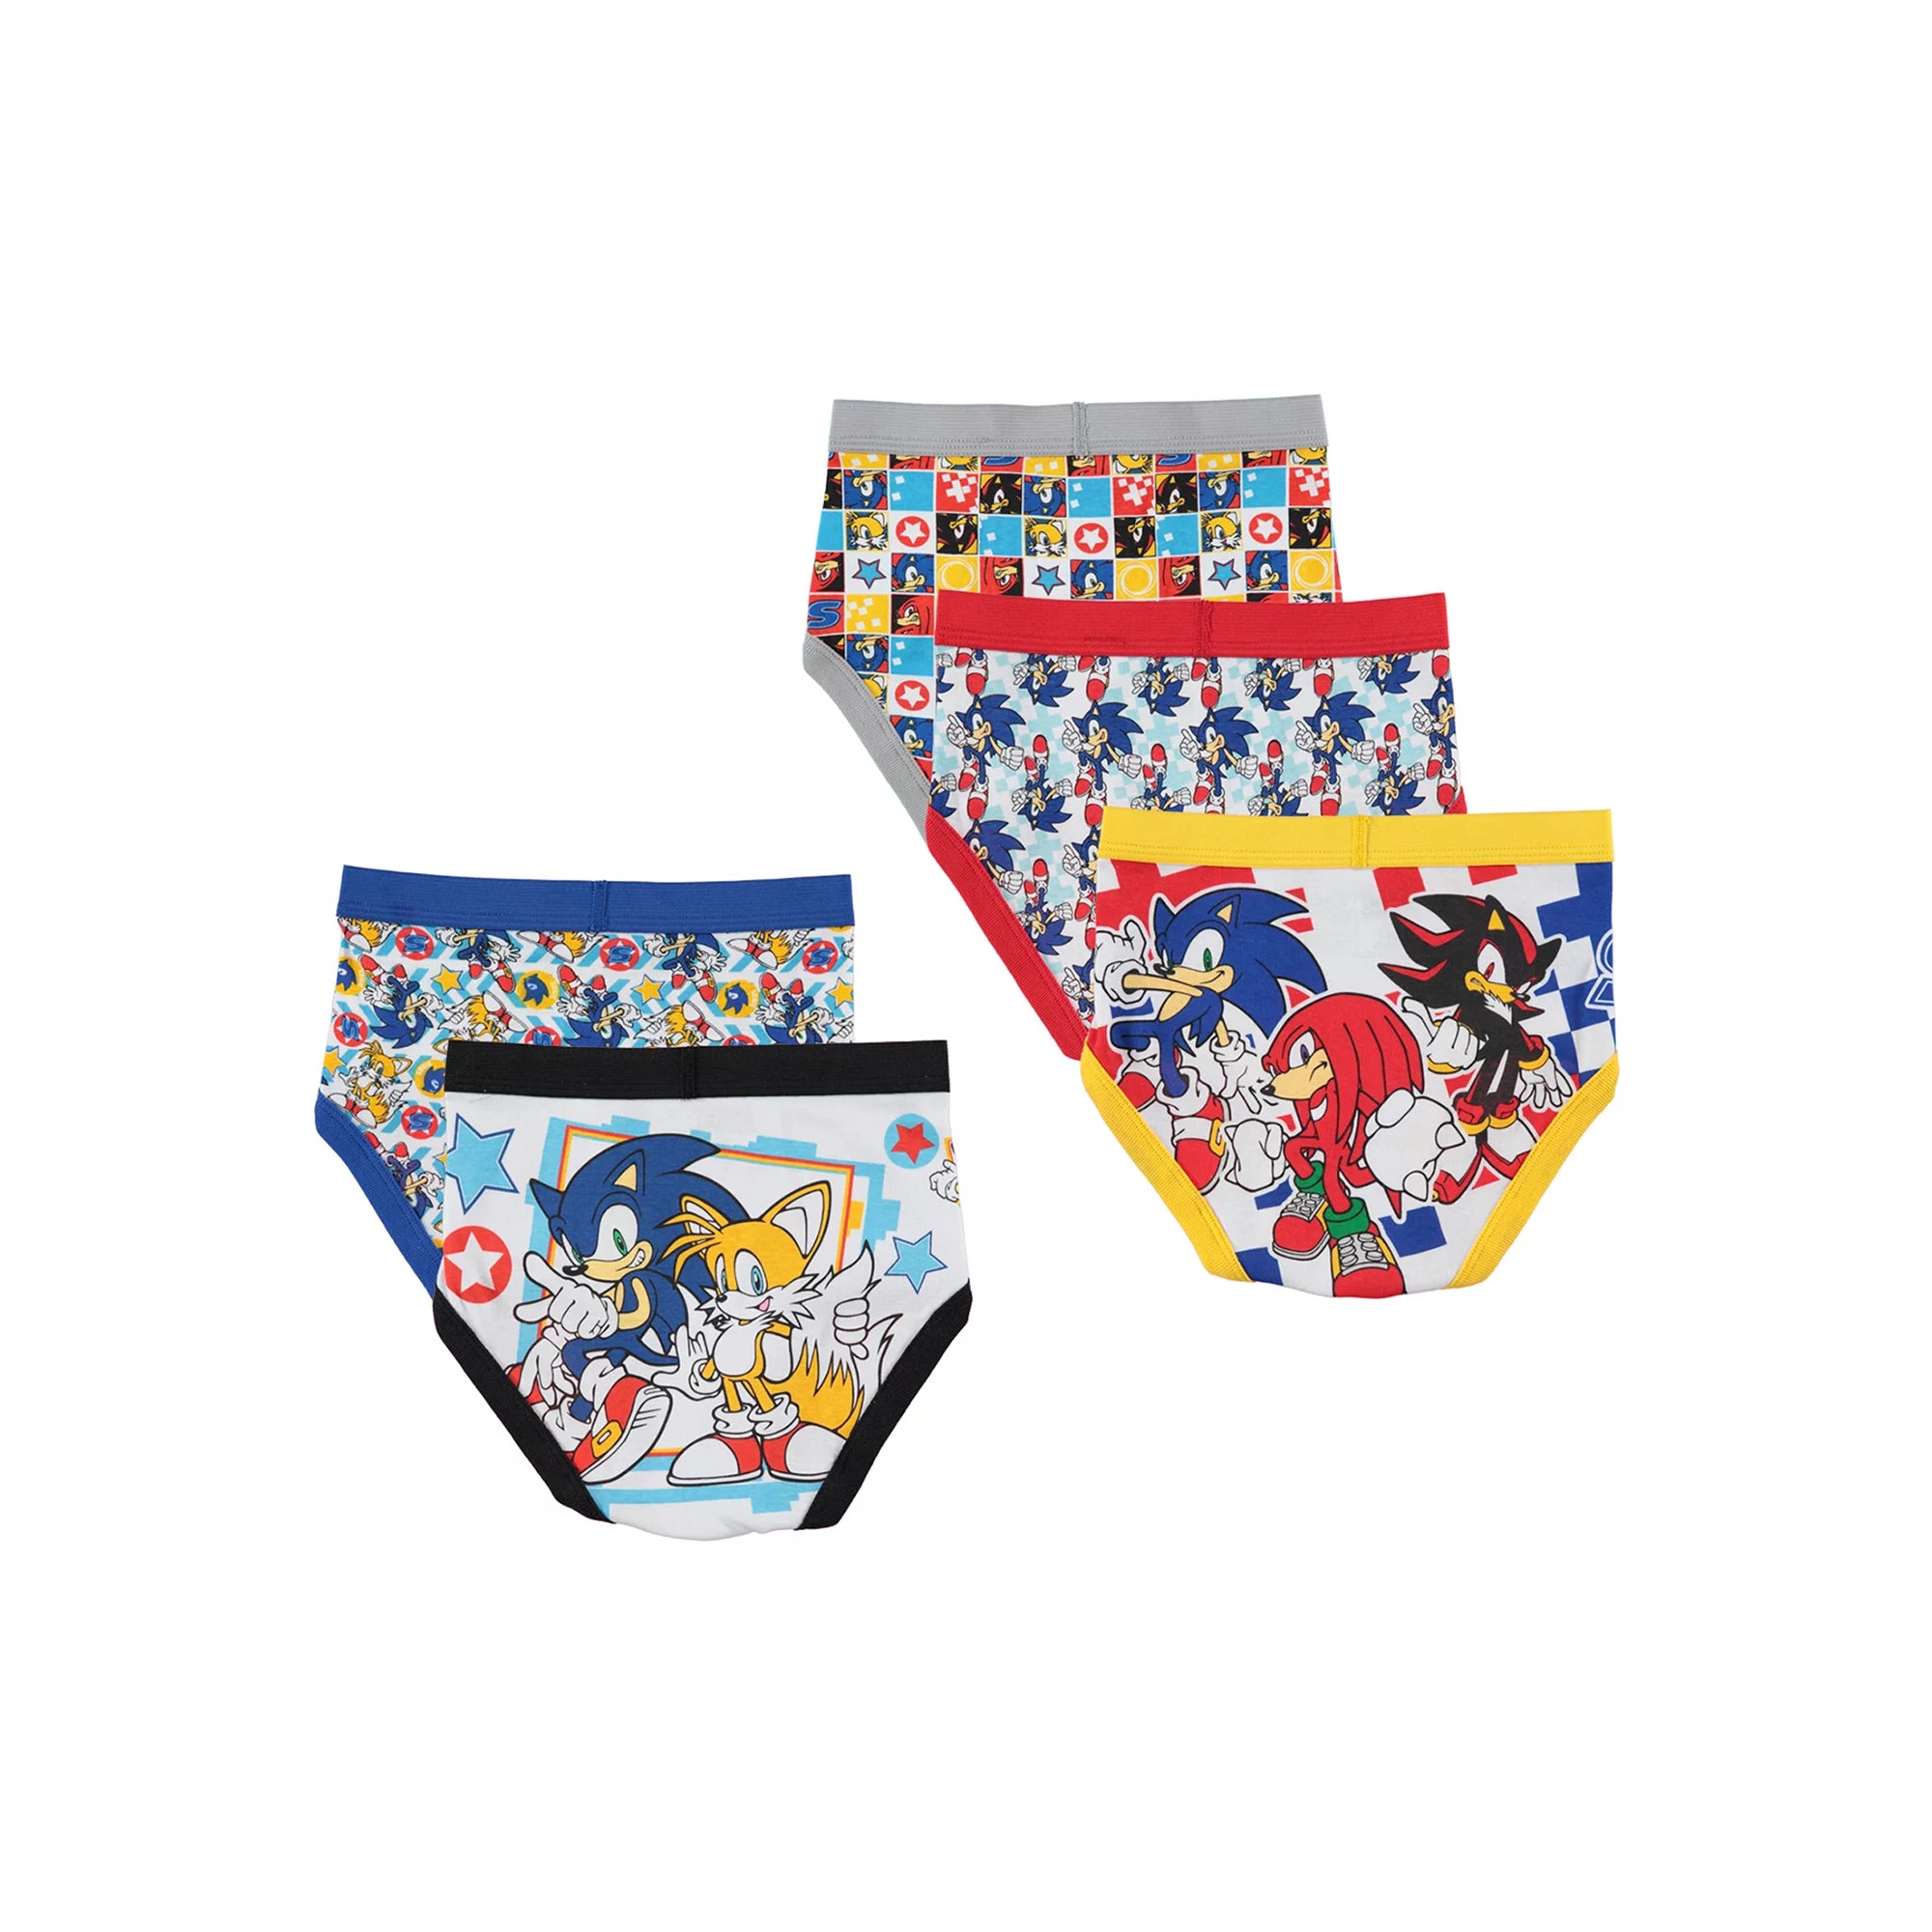 Sonic Pack of 5 Underwear 12214 – MamasLittle